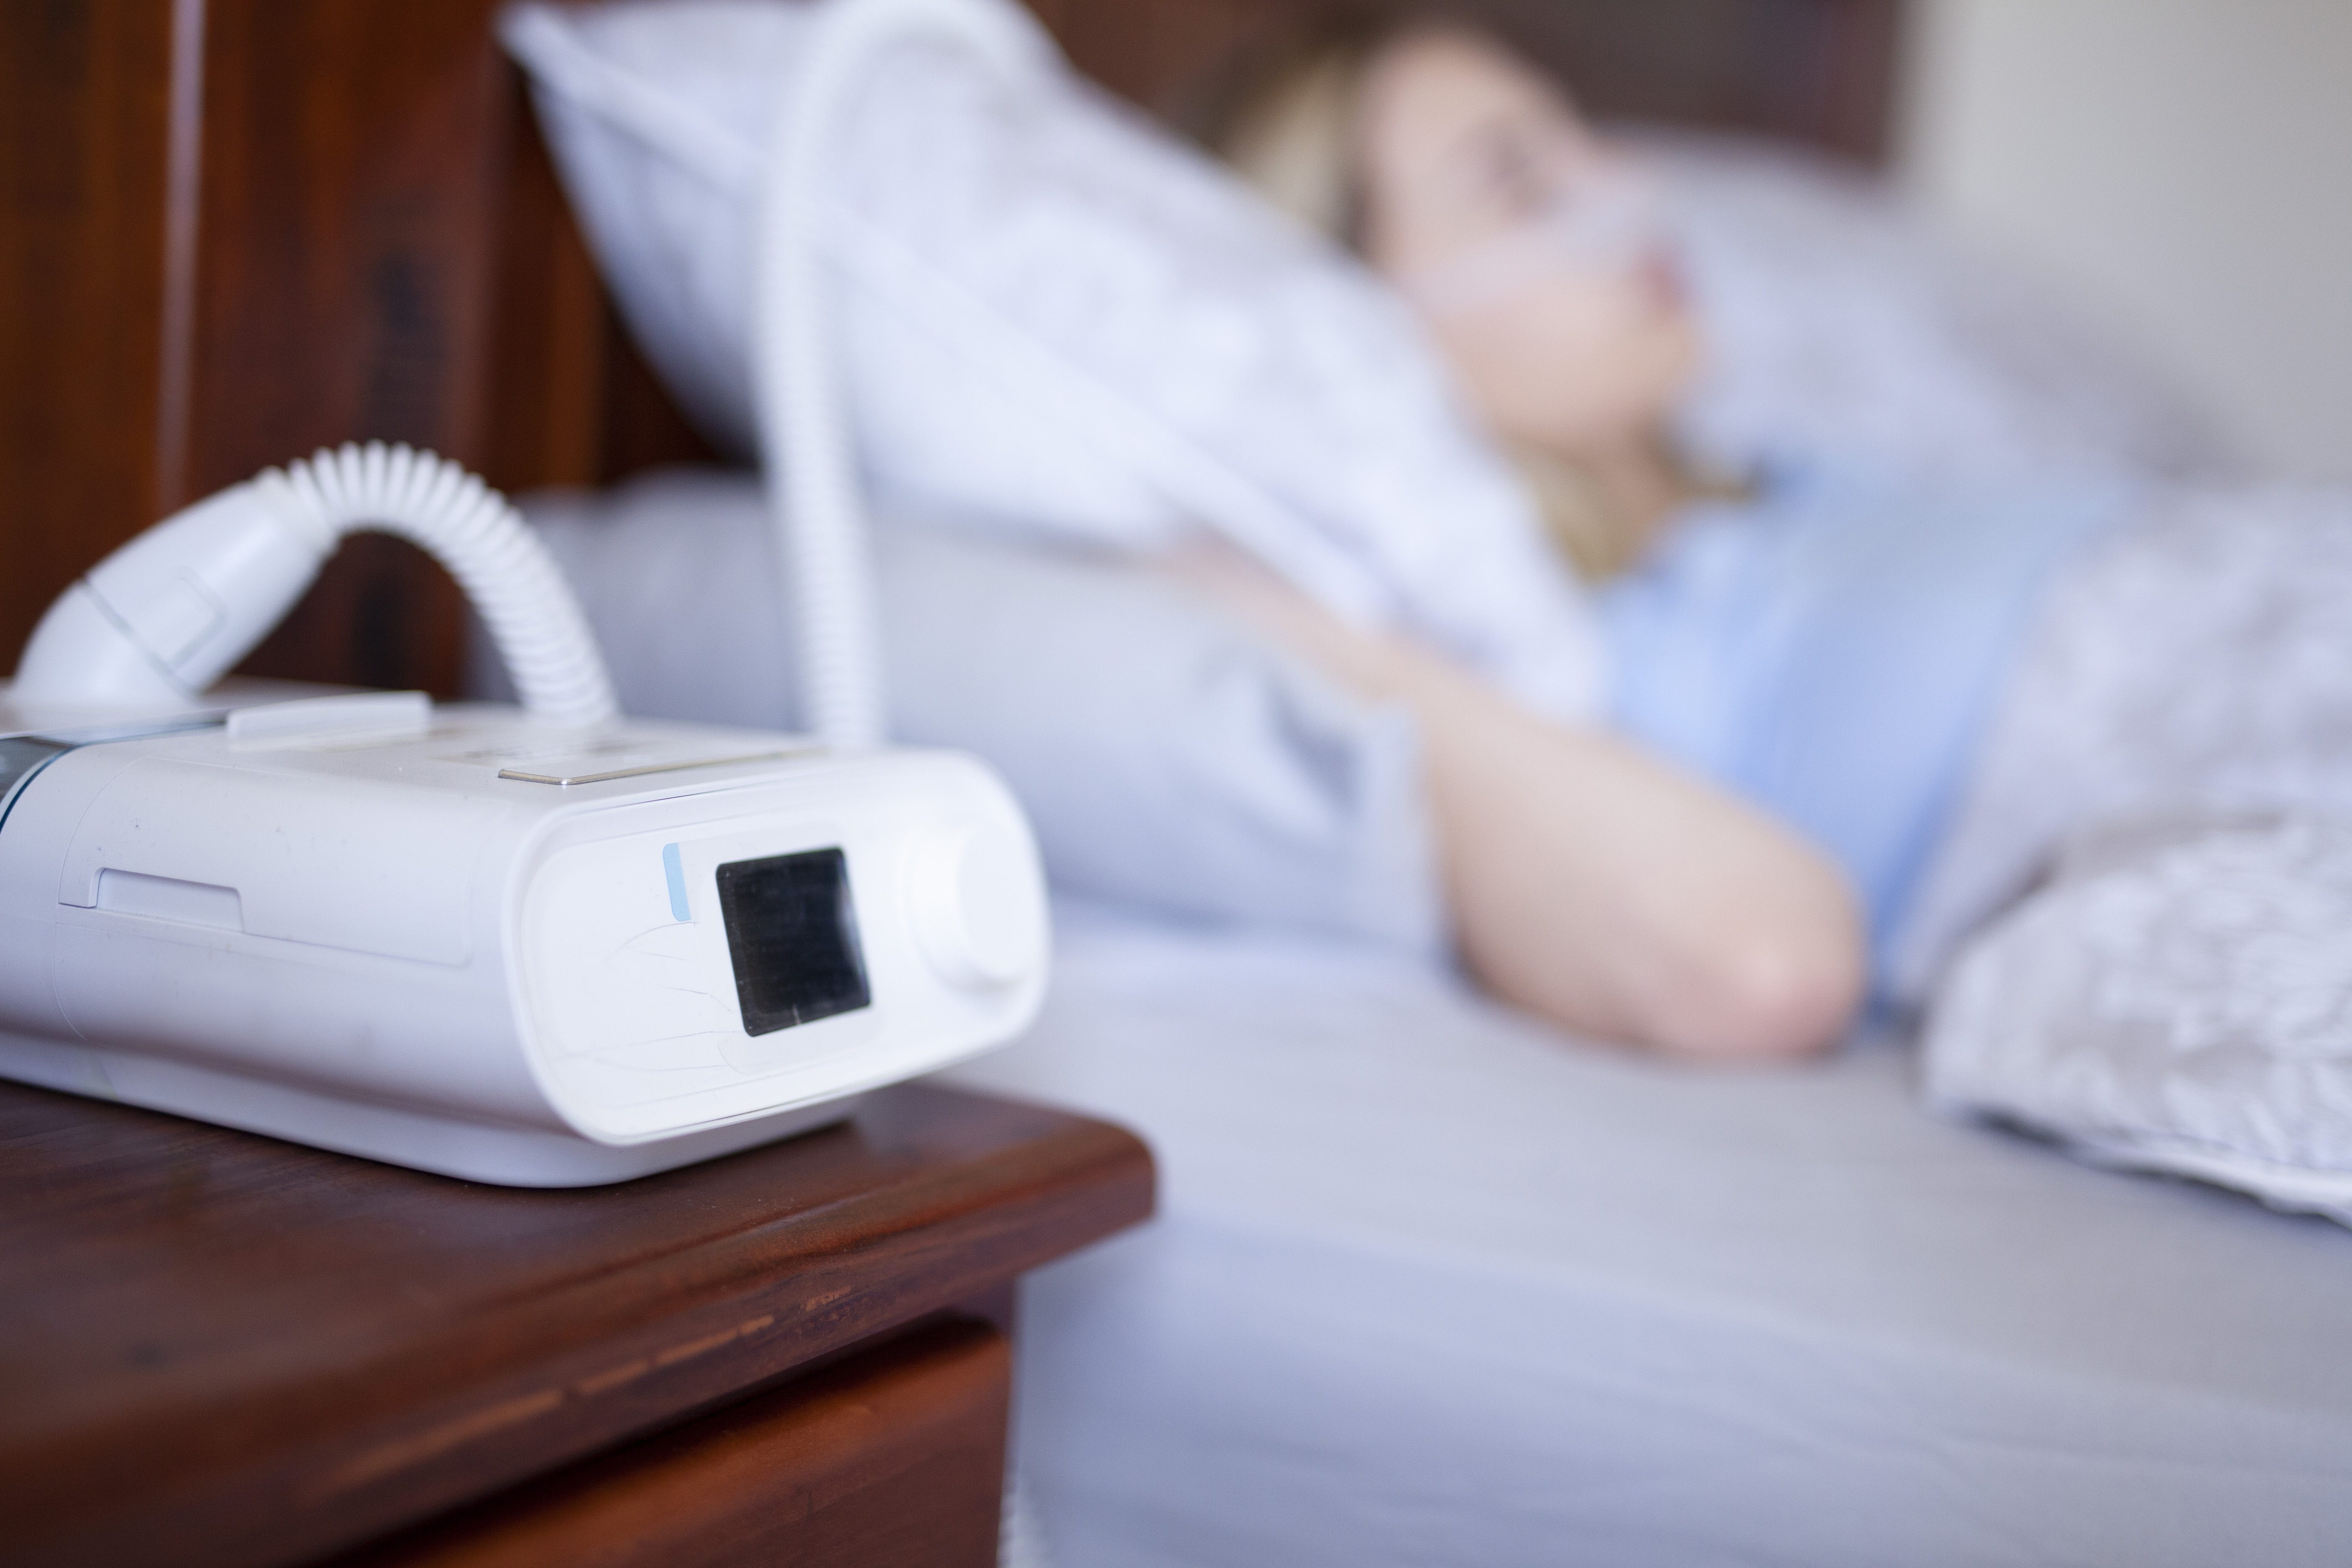 Caresource not covering cpap machine change healthcare plans to save money on prescription drugs